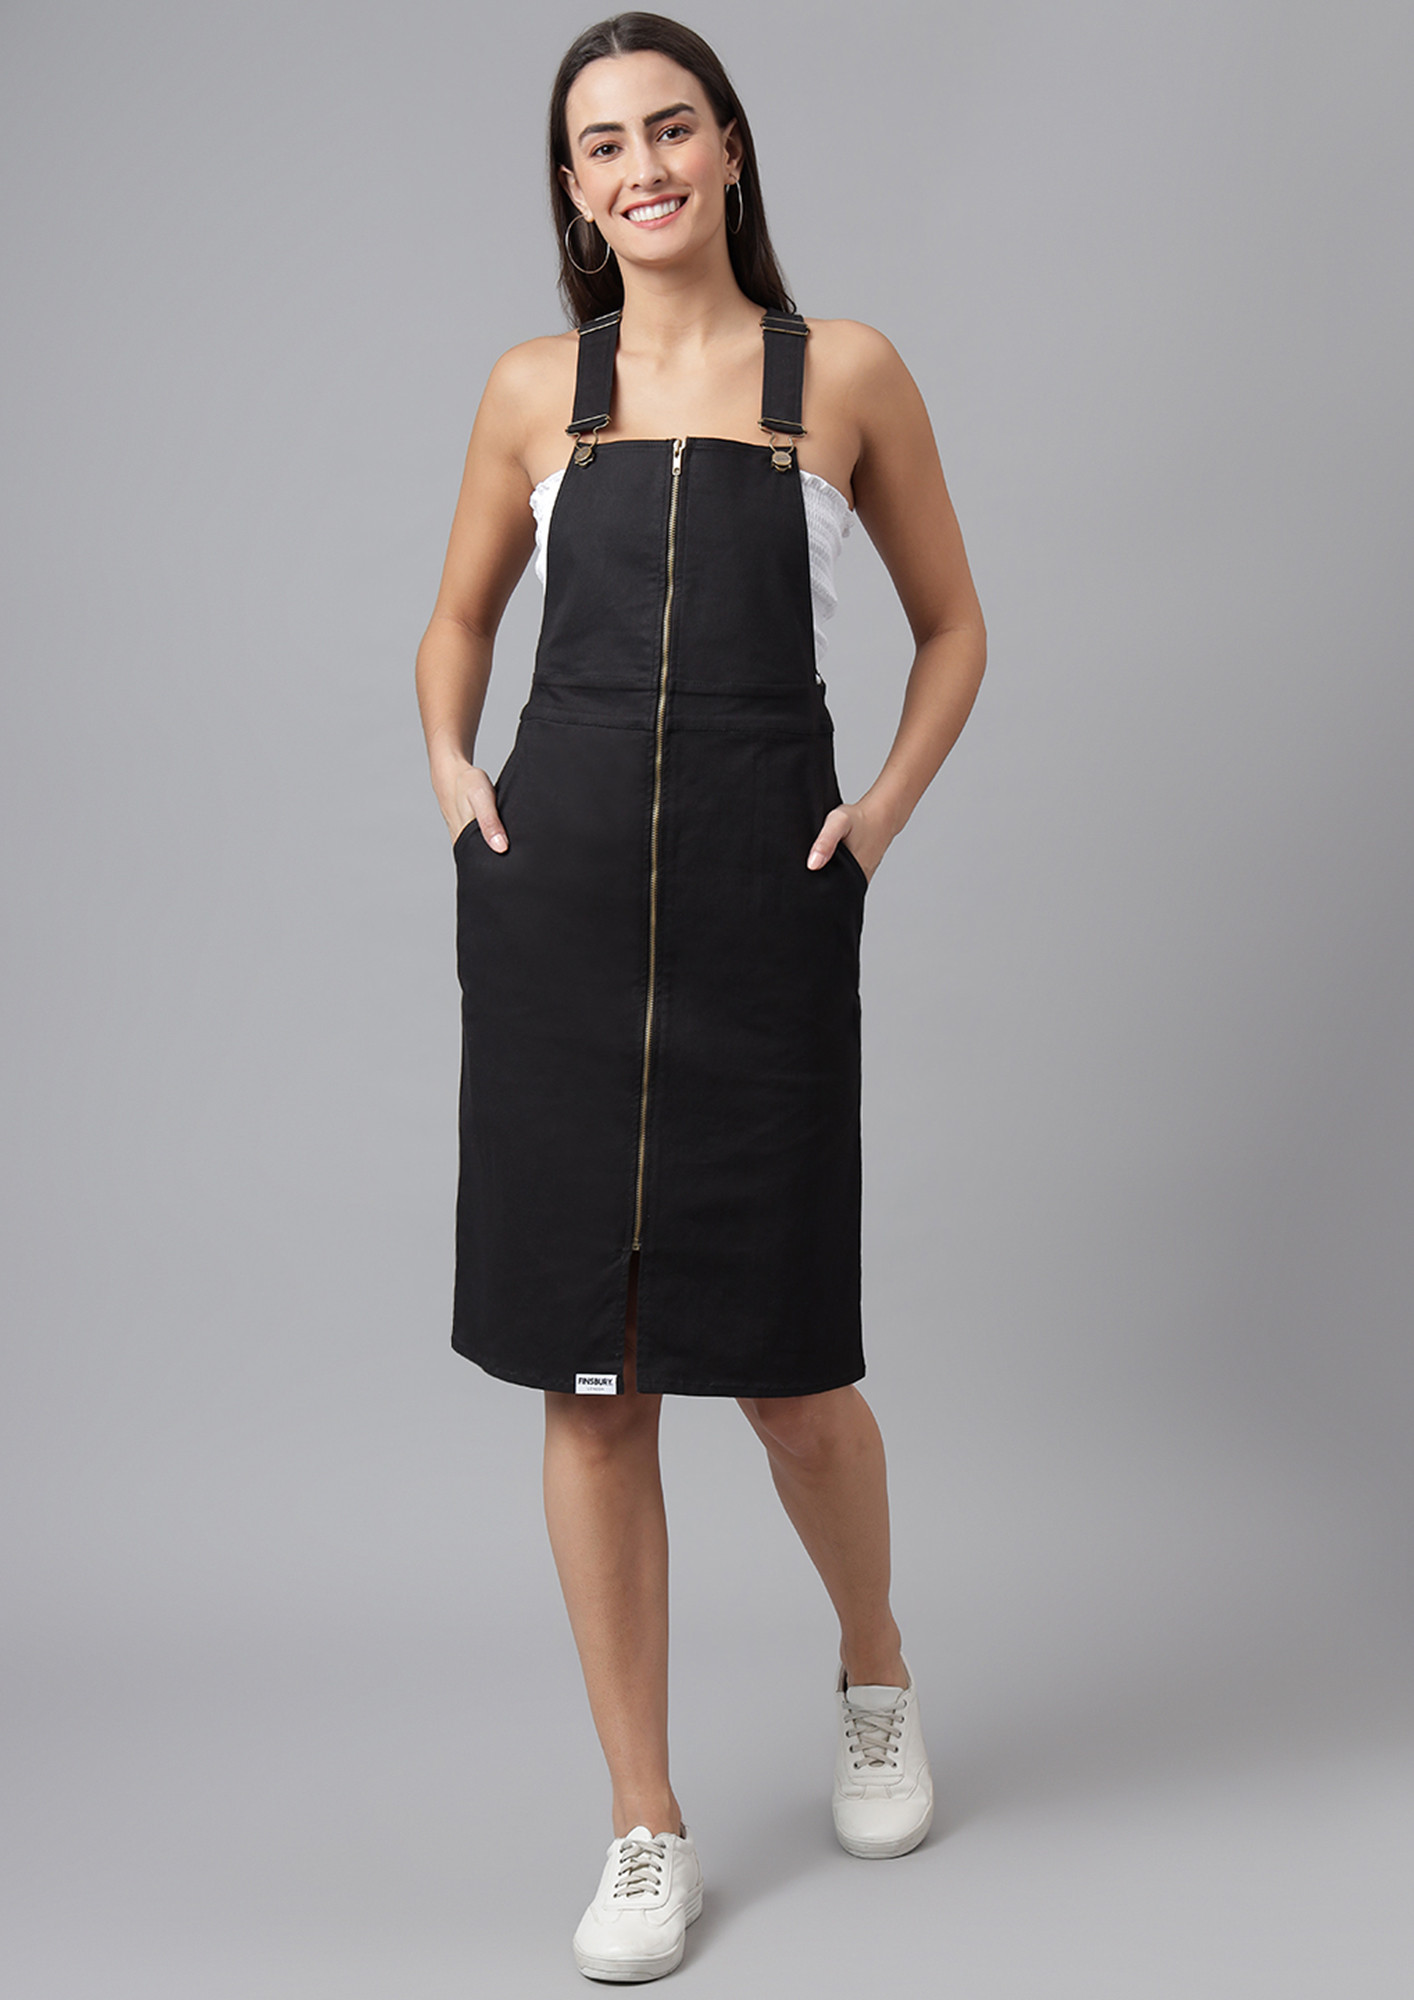 Buy FINSBURY LONDON Women's Cotton Dungaree Dress with Front Zip Opening -  Ebony Black for Women Online in India